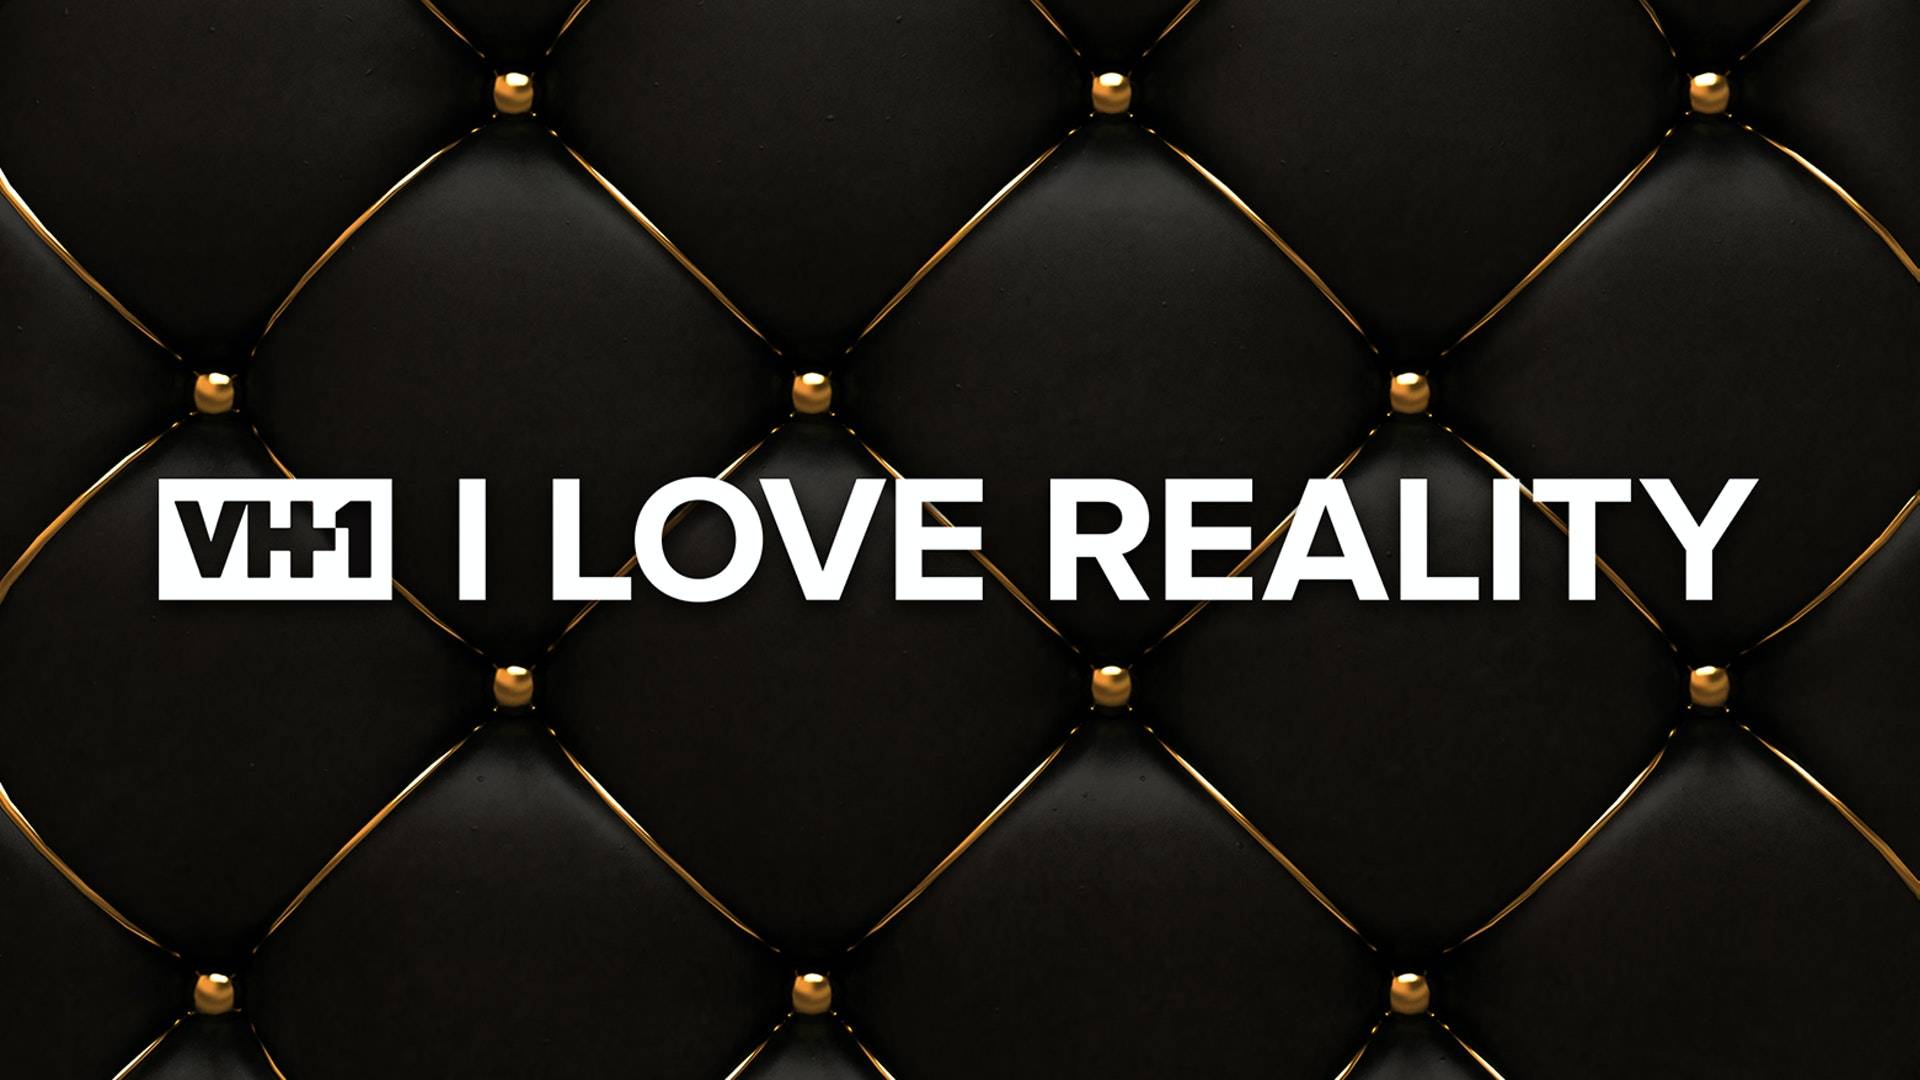 Watch VH1's I Love Reality Channel On Pluto TV